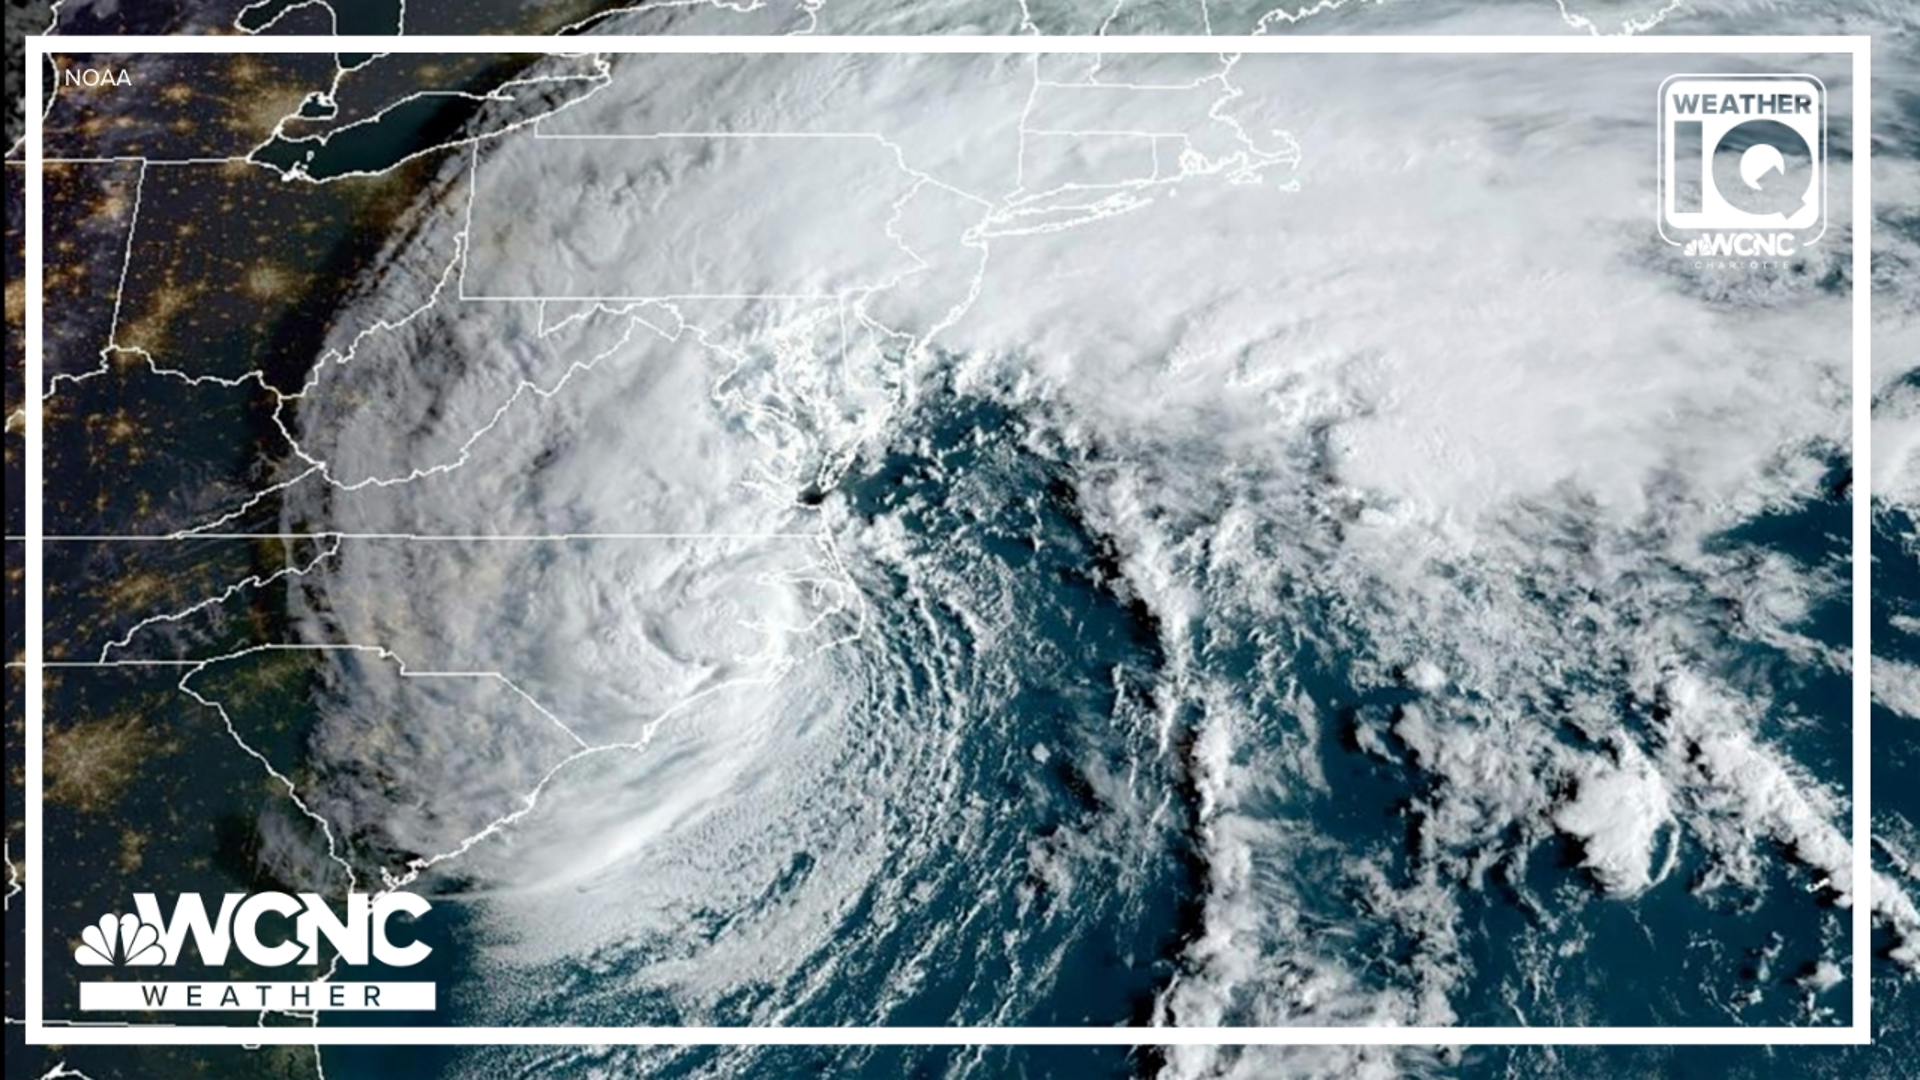 Since 1950 (when record keeping began for El Niño/La Niña and named hurricanes) the phase La Niña has meant more hurricanes and often stronger storms. But why?